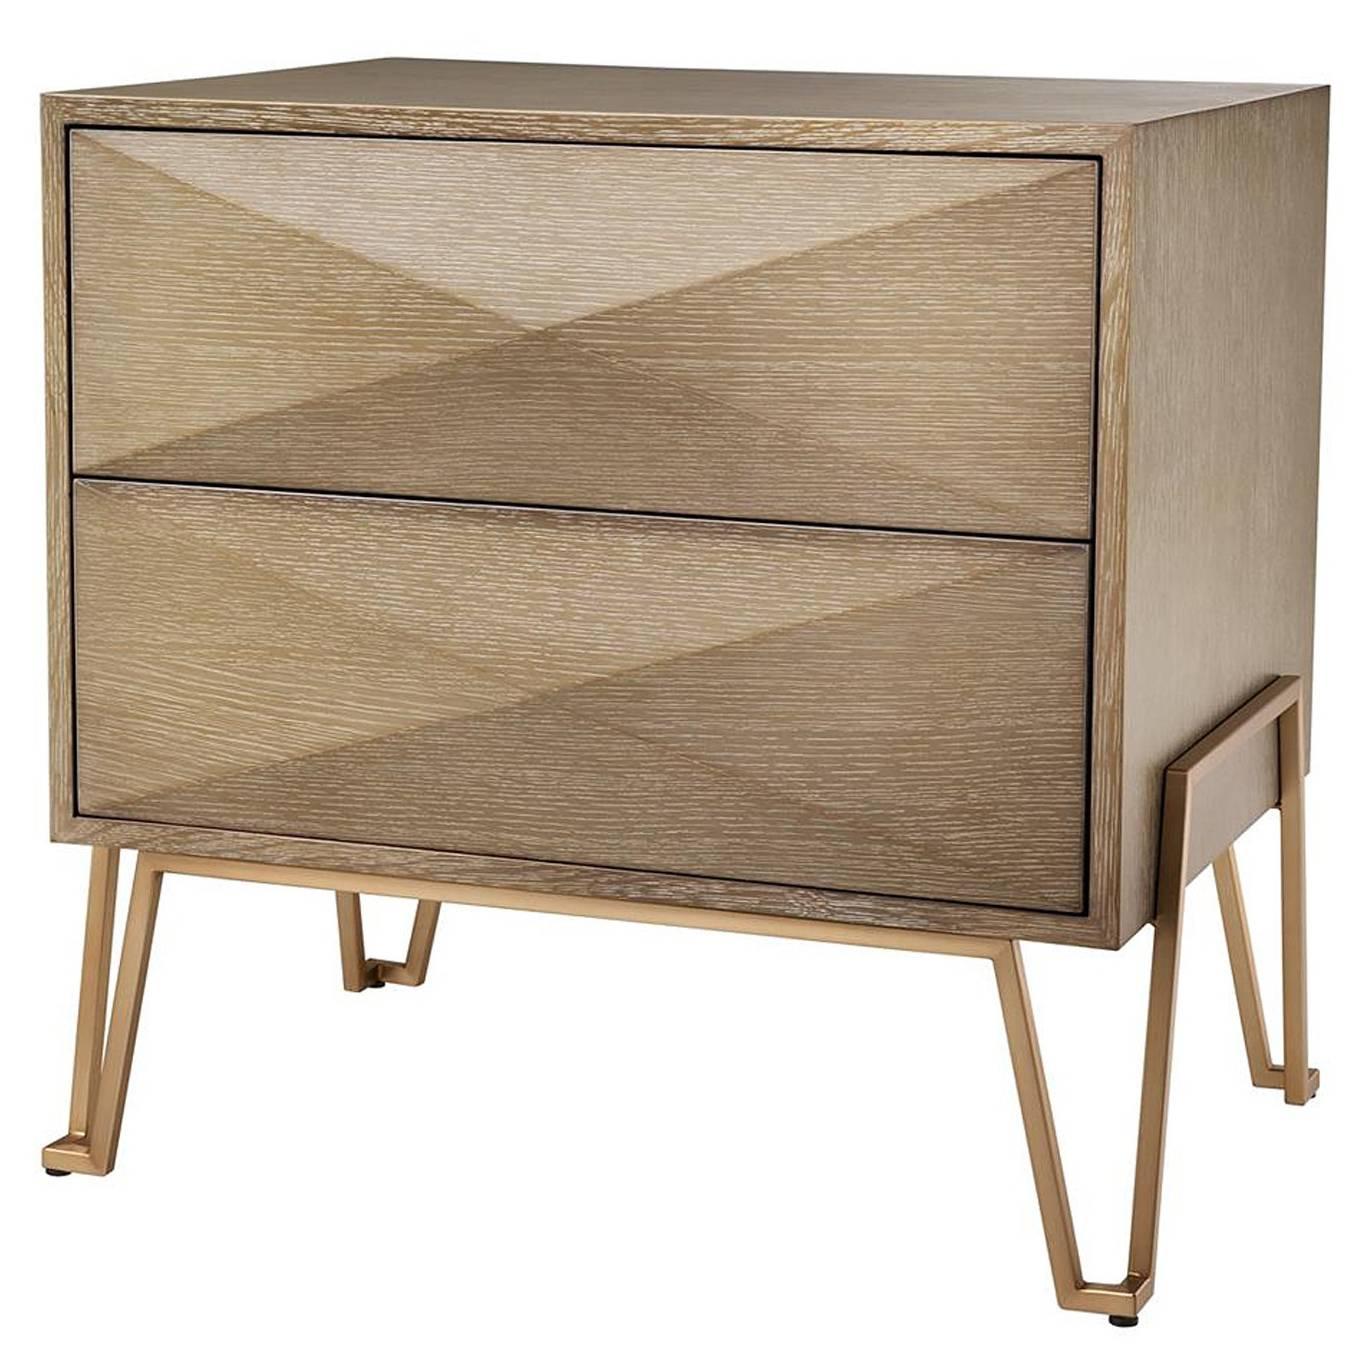 Catalaga Side Table or Nightstand in Washed Oak Veneer and Brass